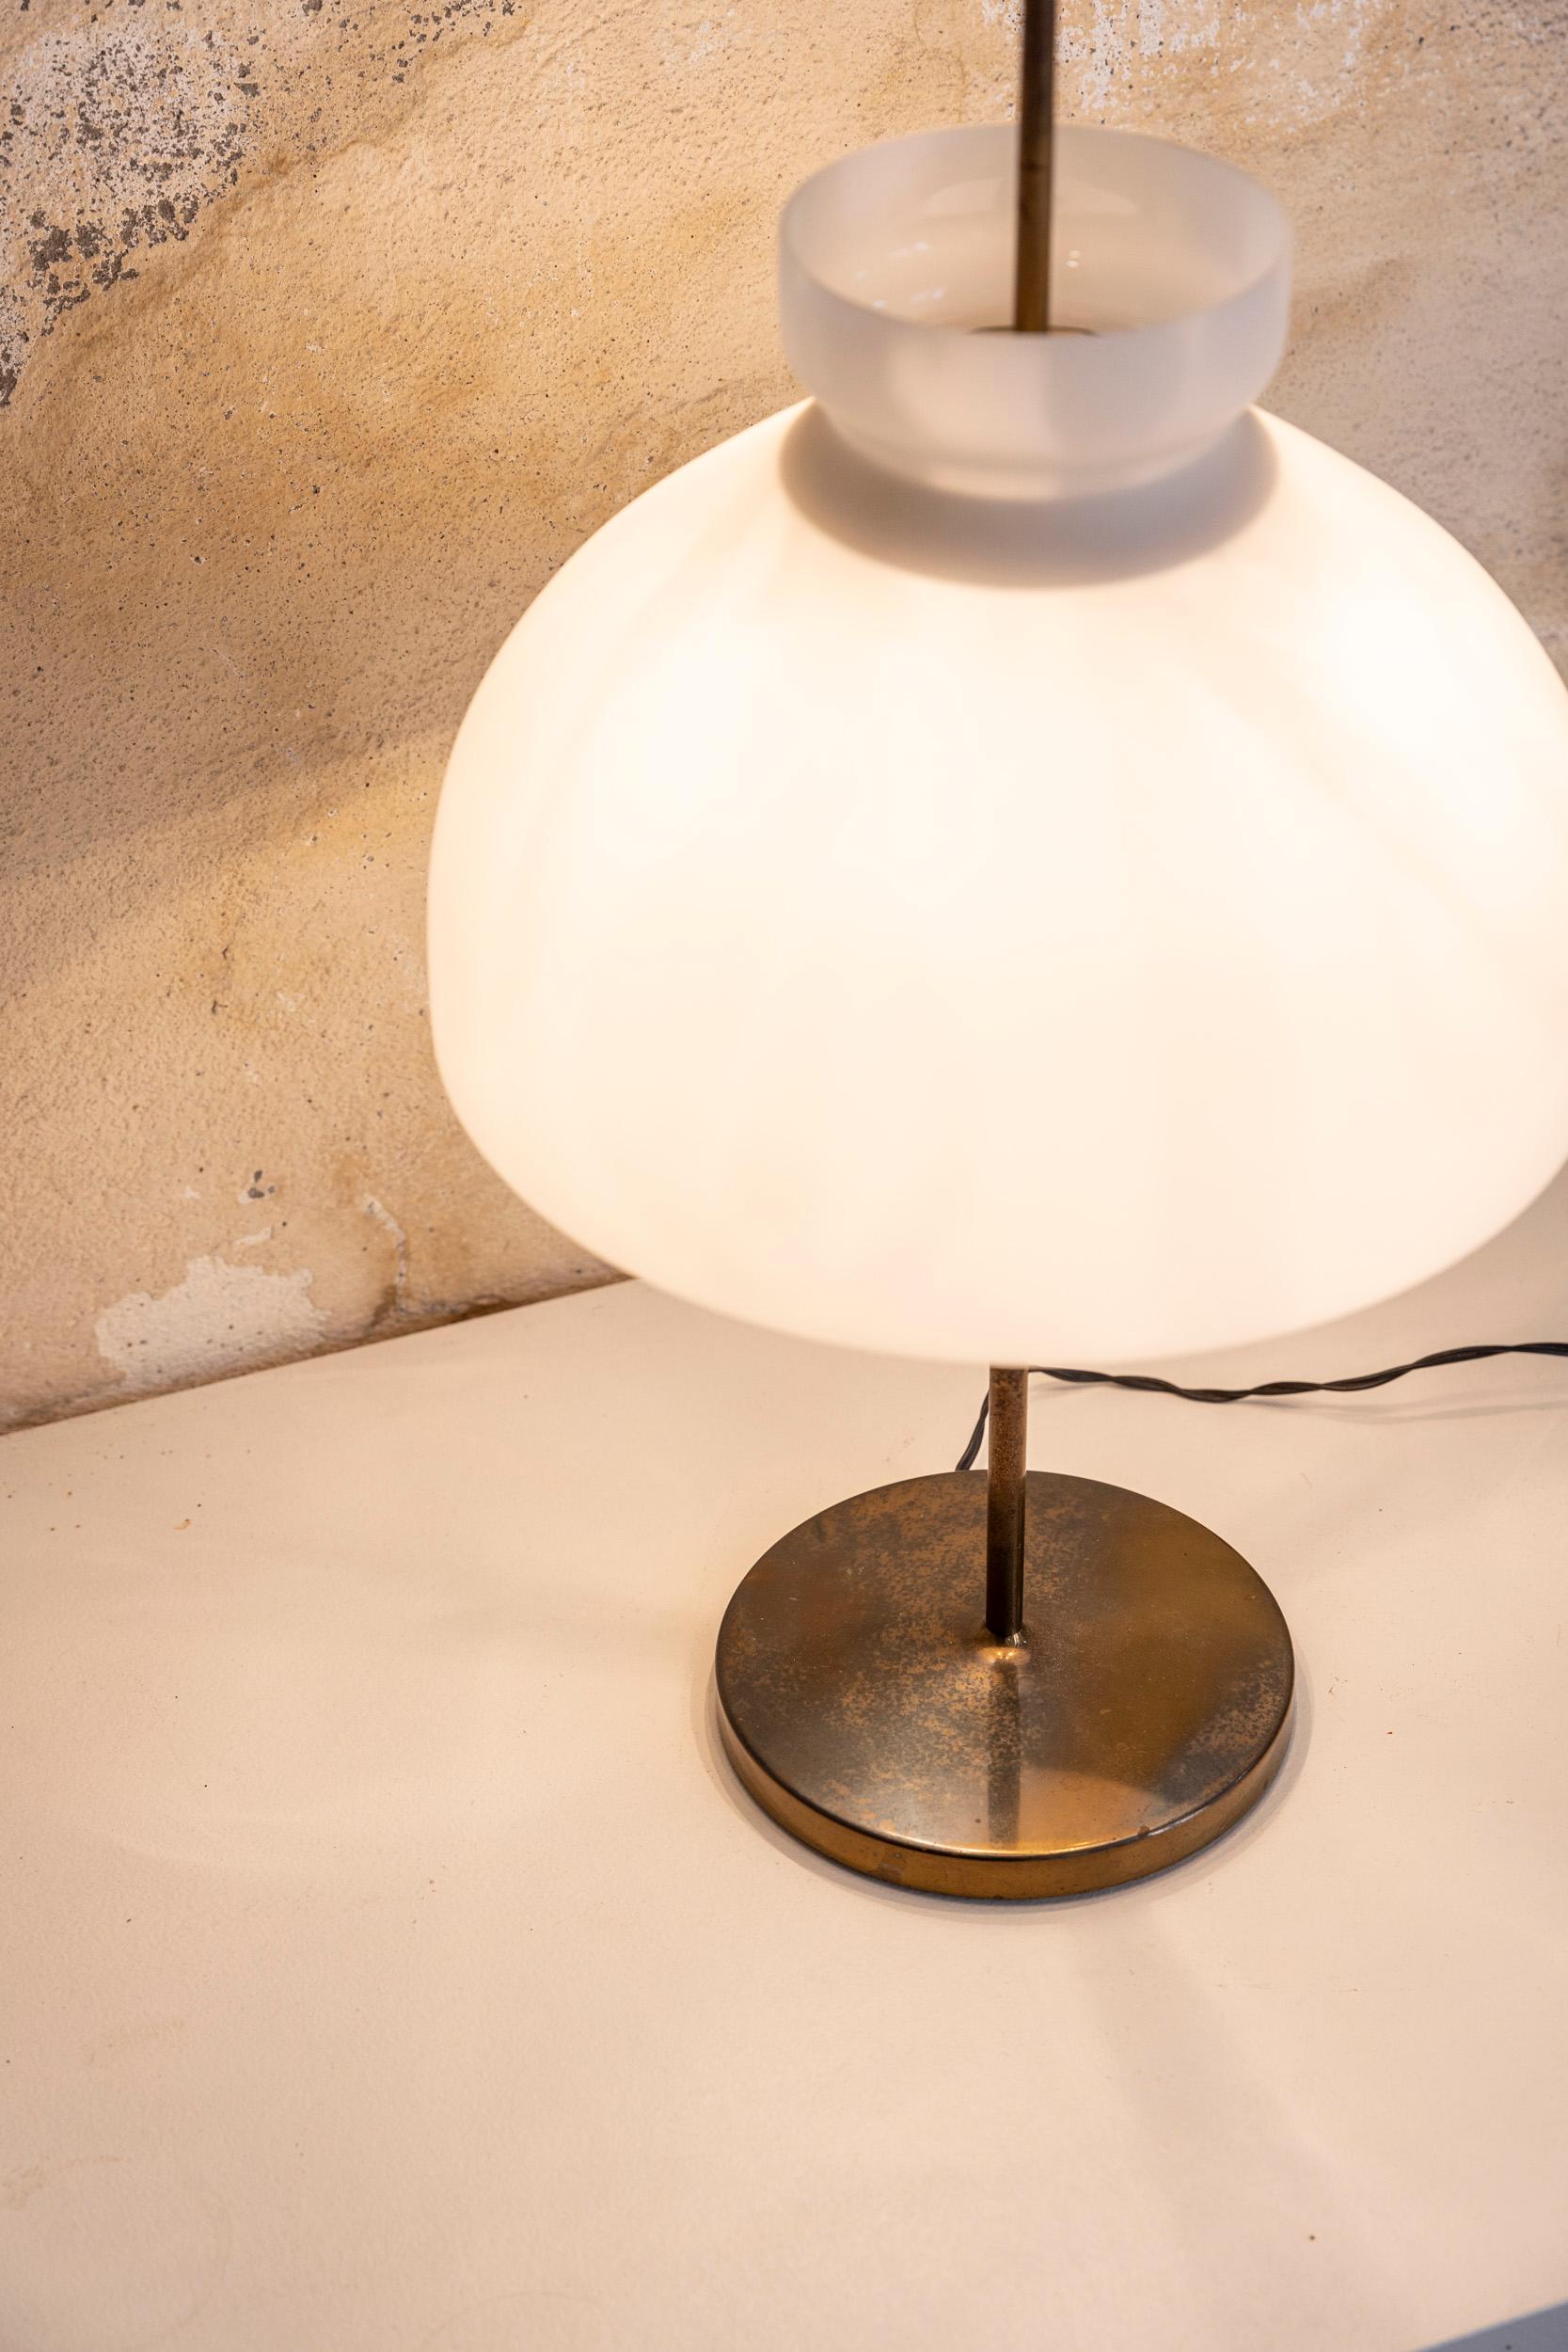  Midcentury Arenzano table lamp by Ignazio Gardella for Azucena, Italy 1956 For Sale 4